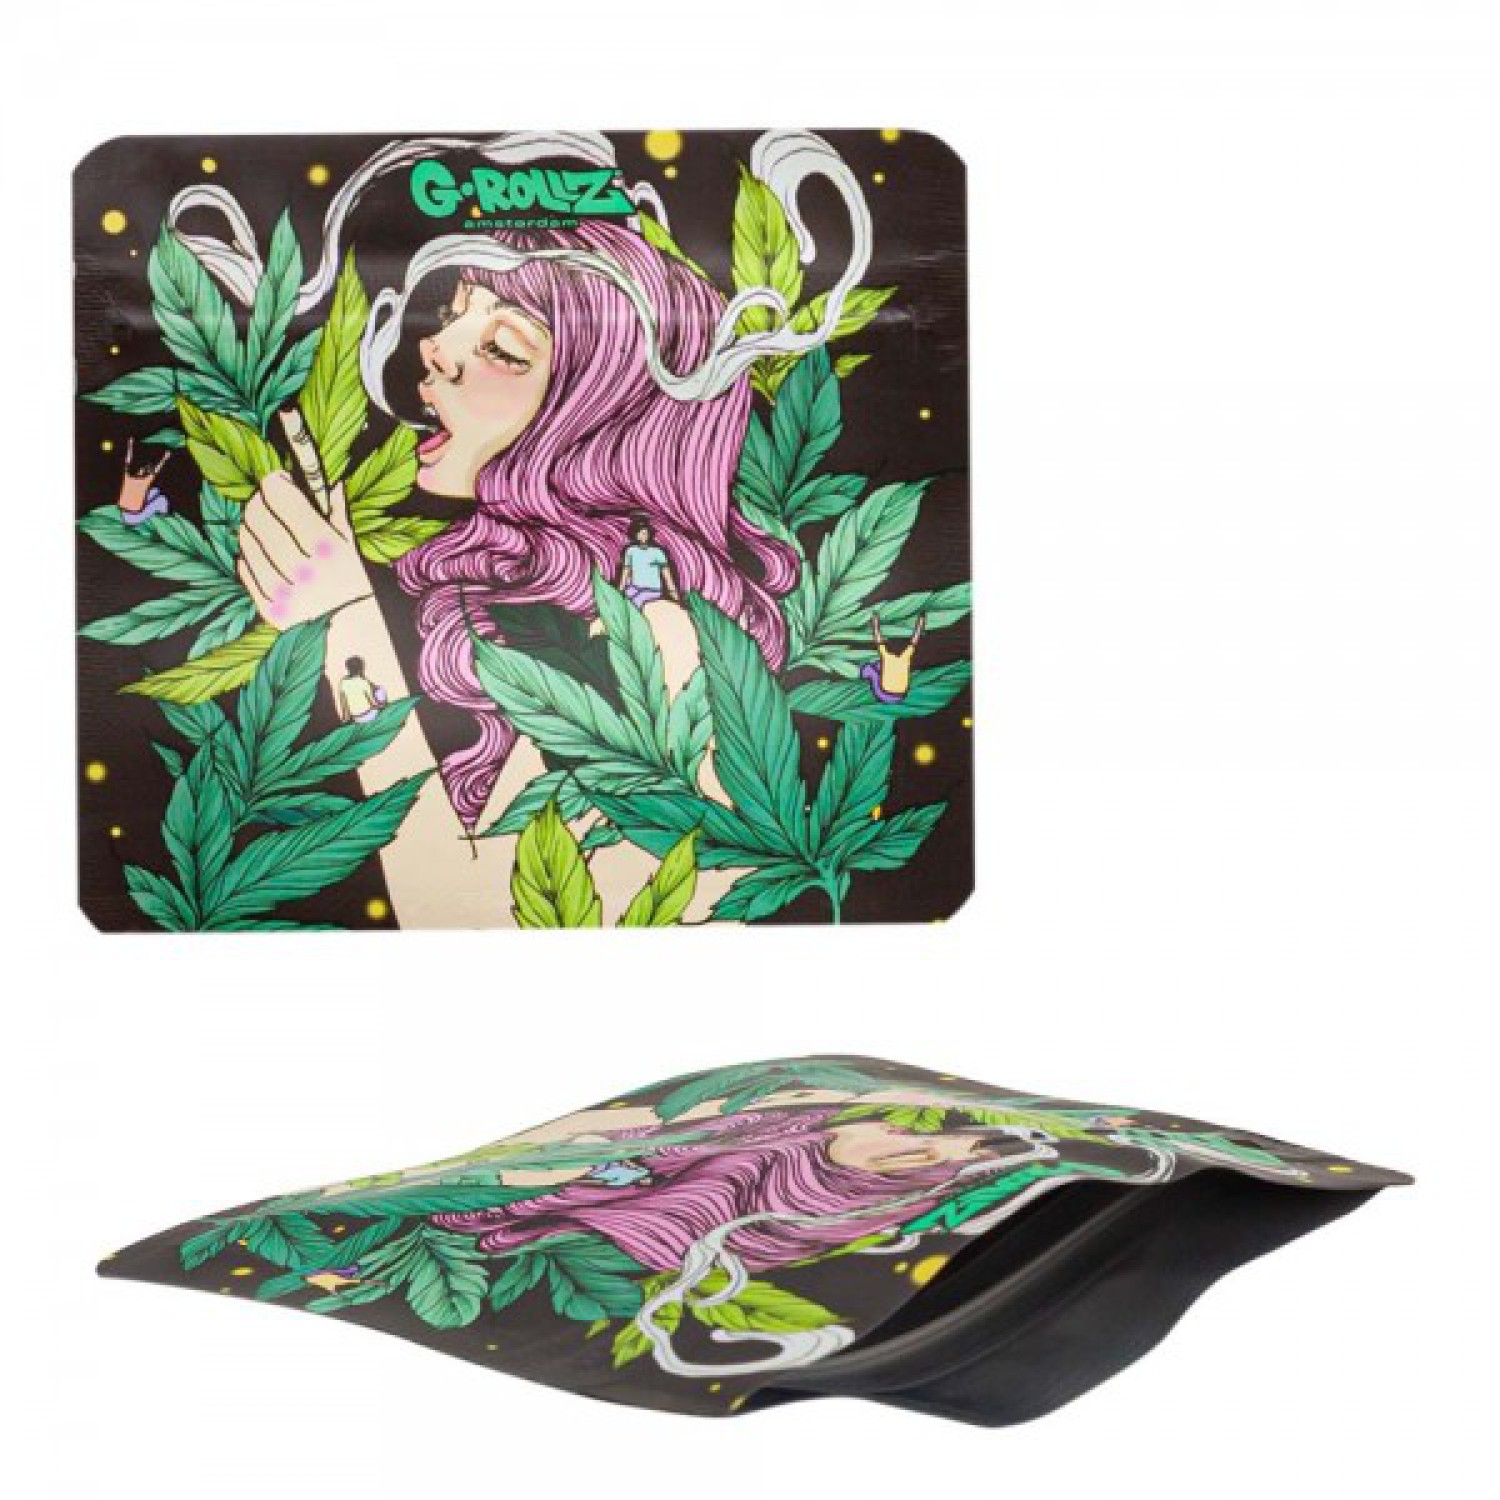 G-Rollz | 'Smoking Girl' Smell Proof Bags 90 x 80mm - 10pcs in Display